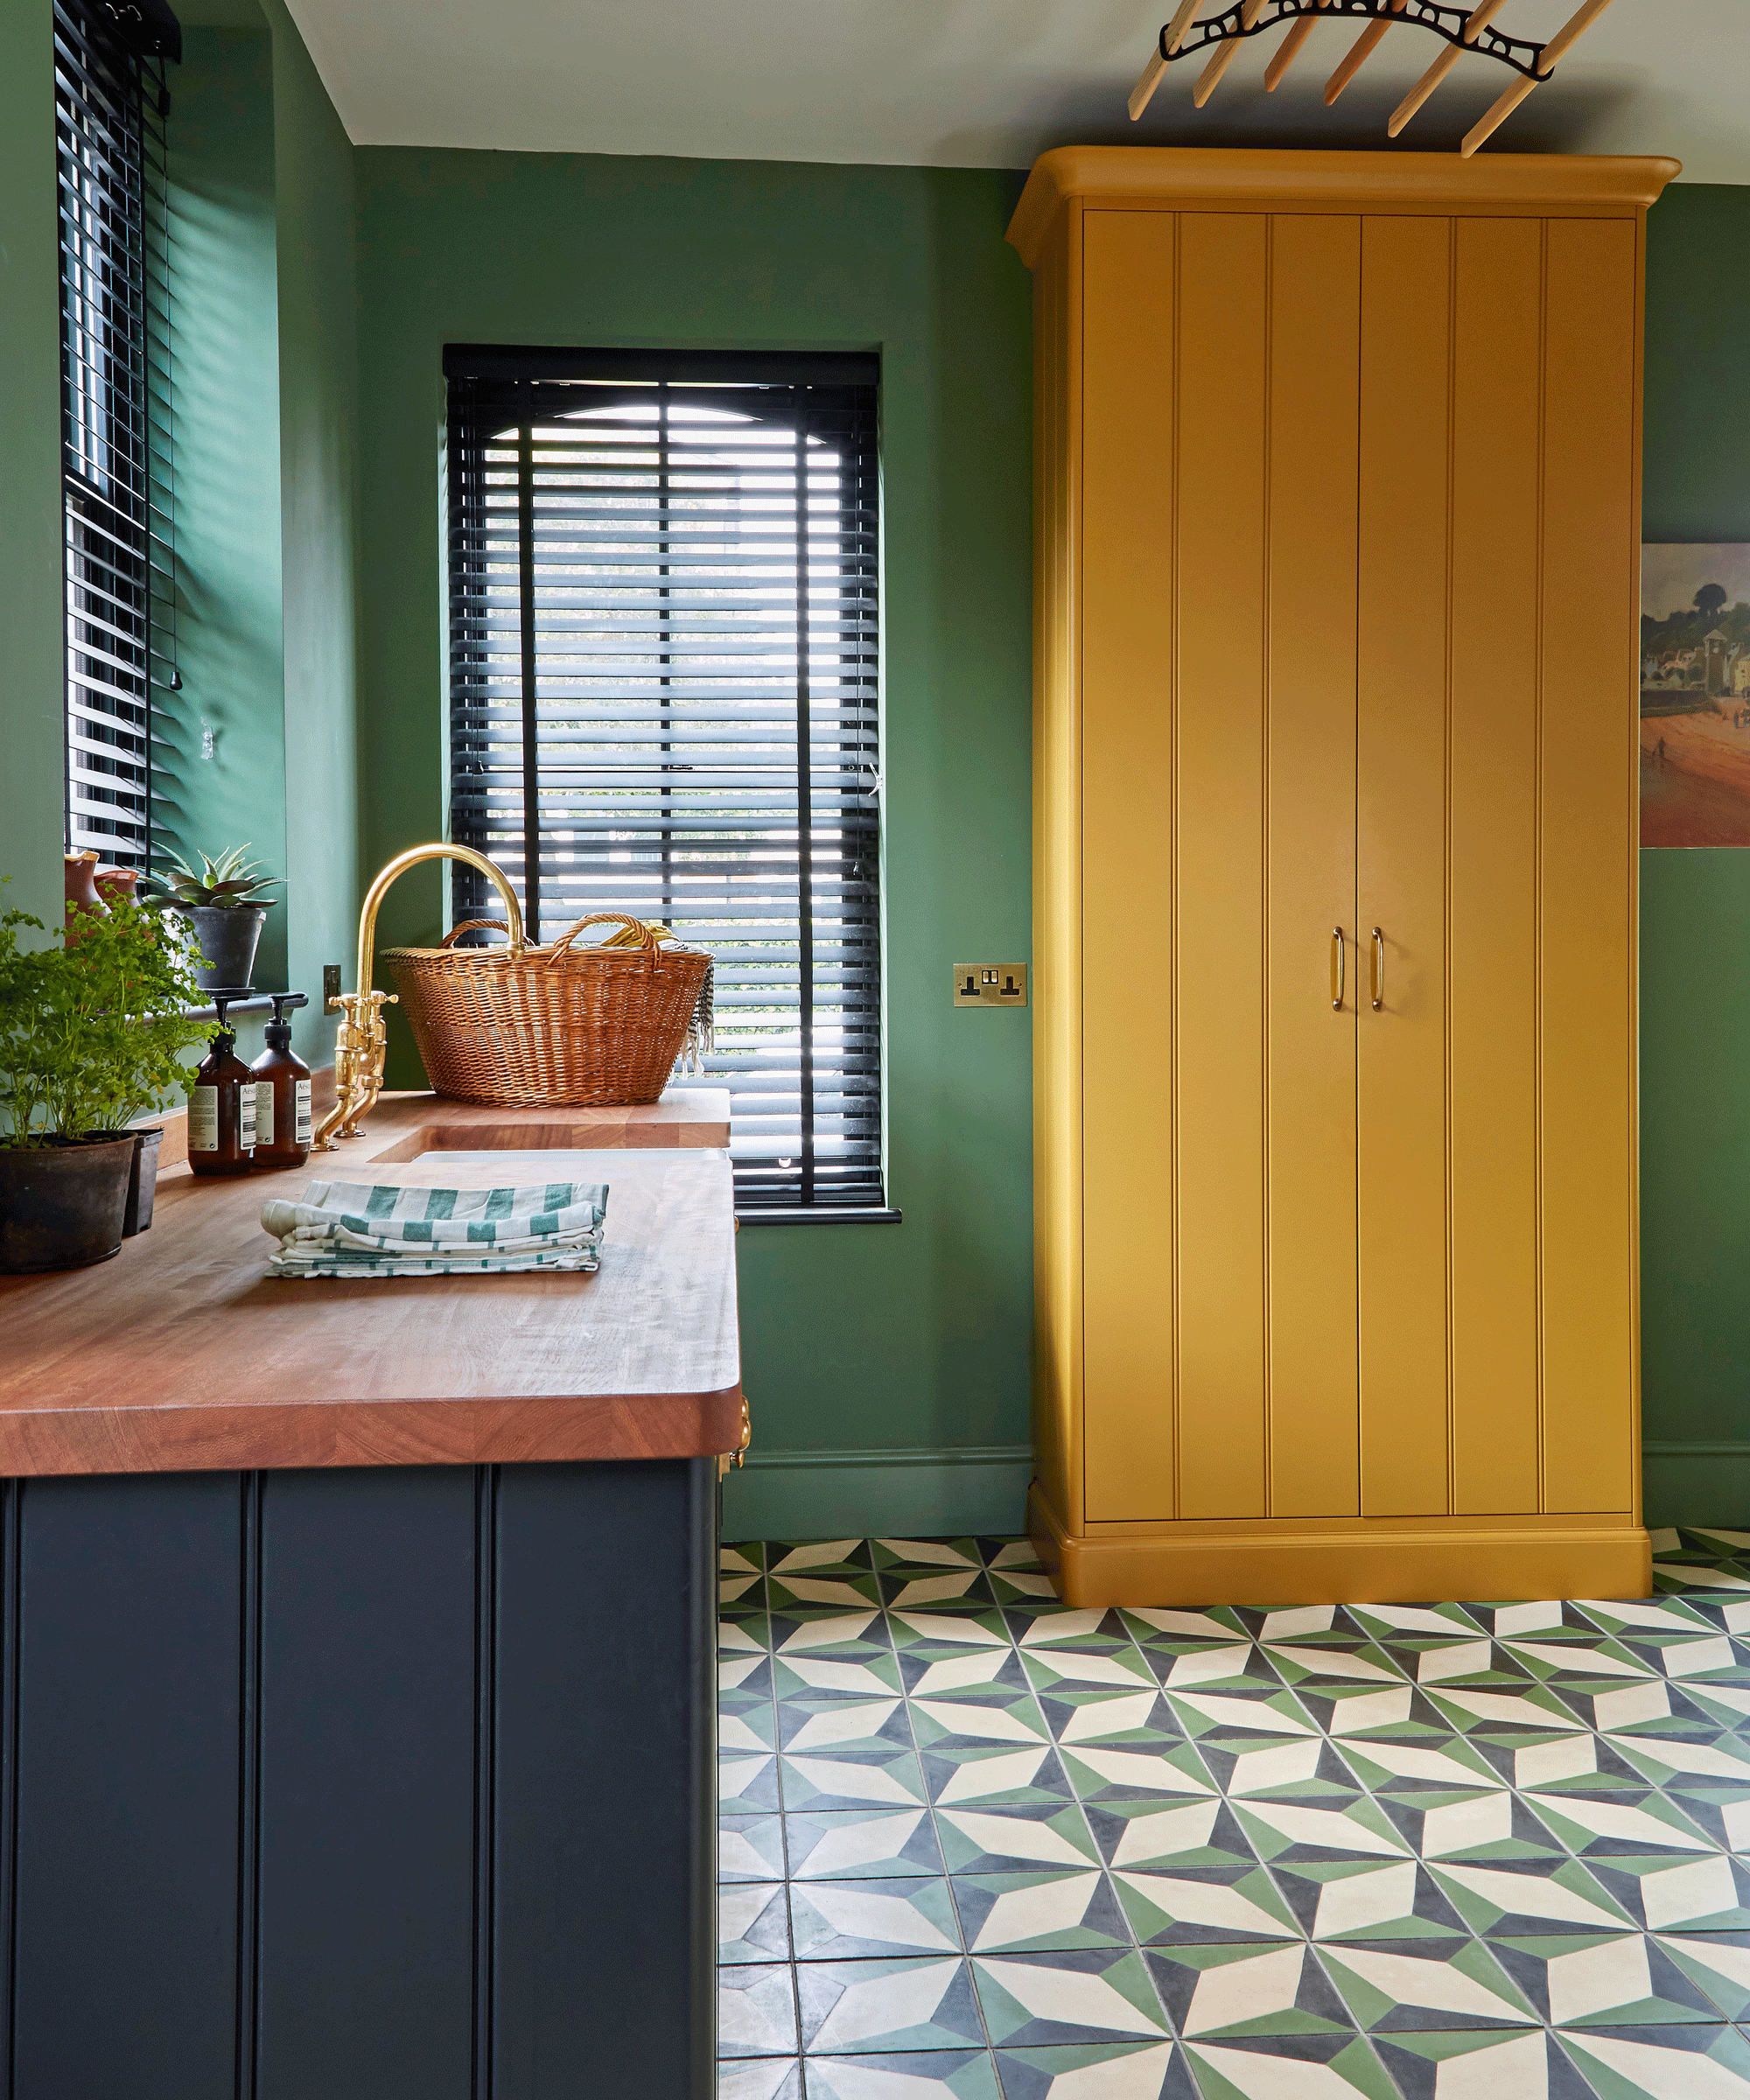 Colourful kitchen with yellow cabinet, green walls and tiled floor